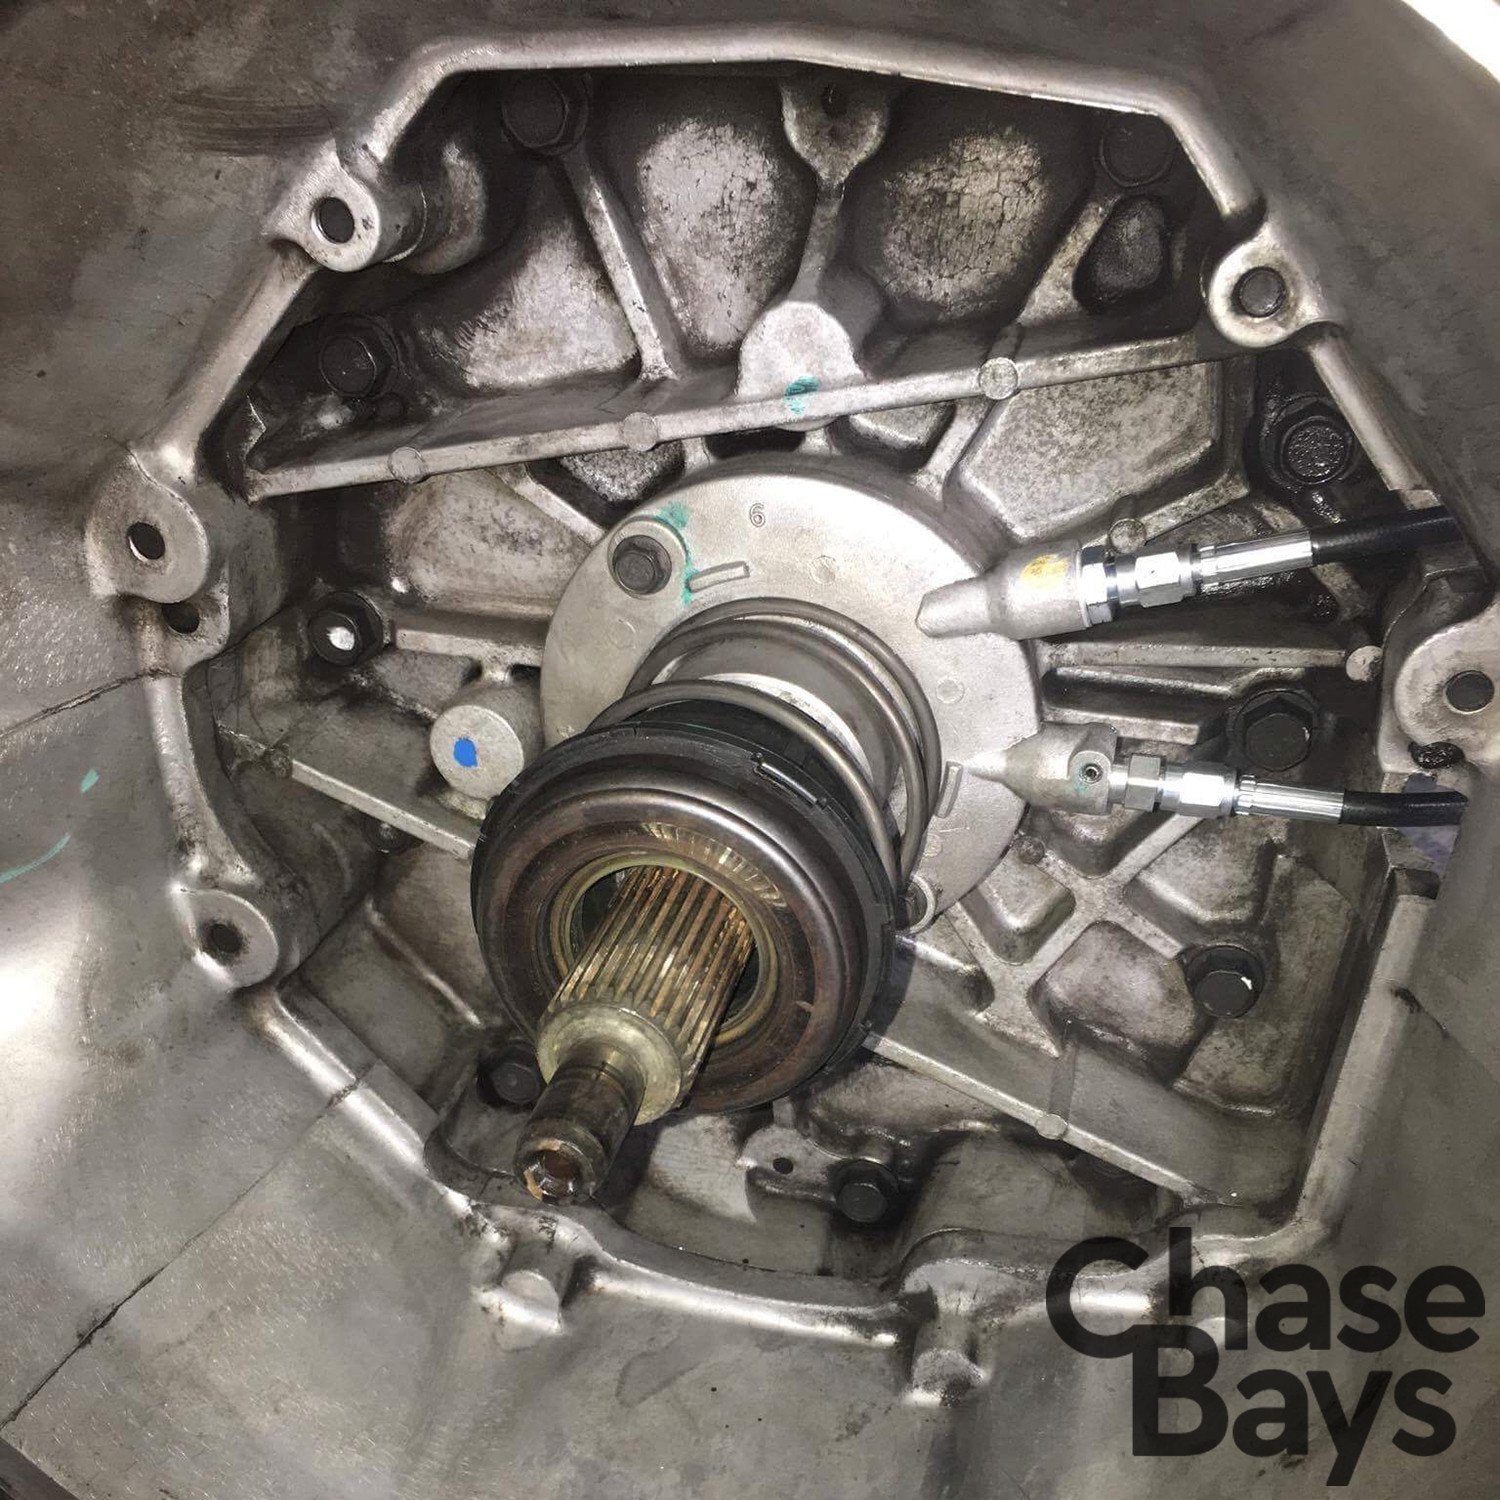 CHASE BAYS BMW E30 clutch line for GM LS1 LS2 T56 TR6060 transmission